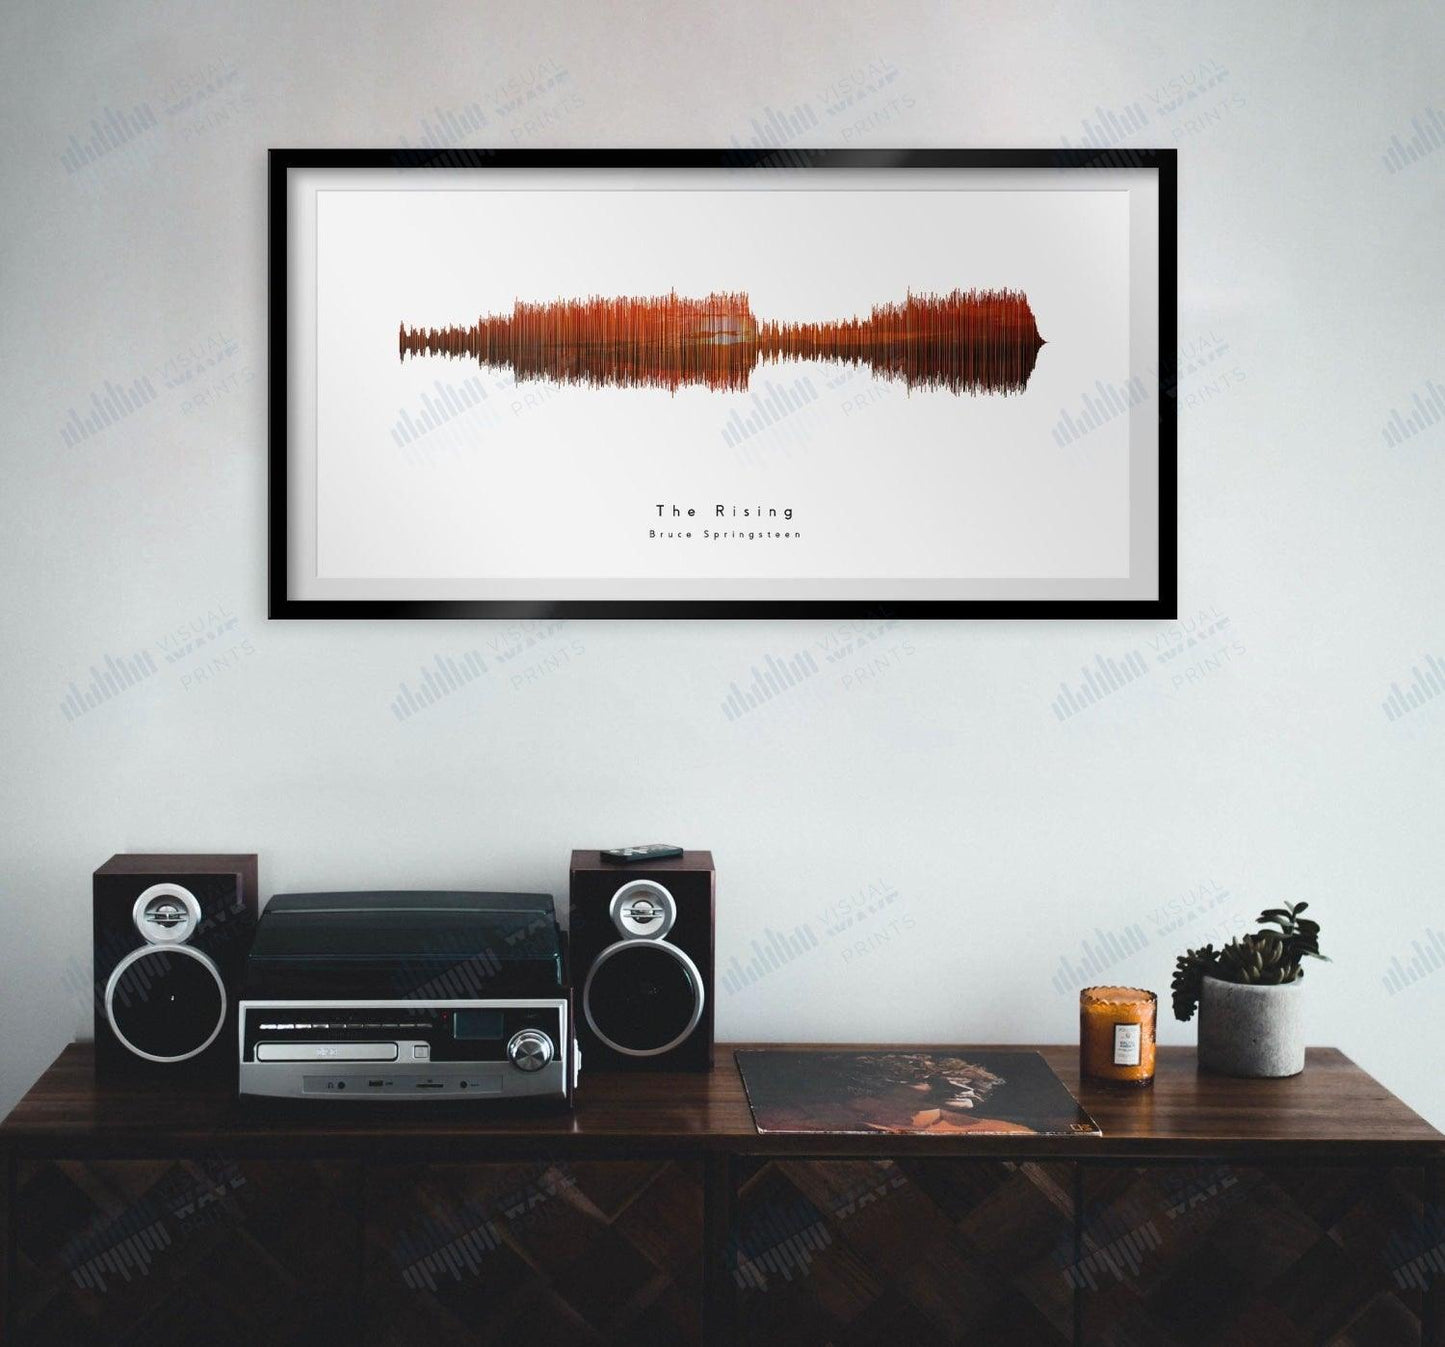 The Rising by Bruce Springsteen - Visual Wave Prints